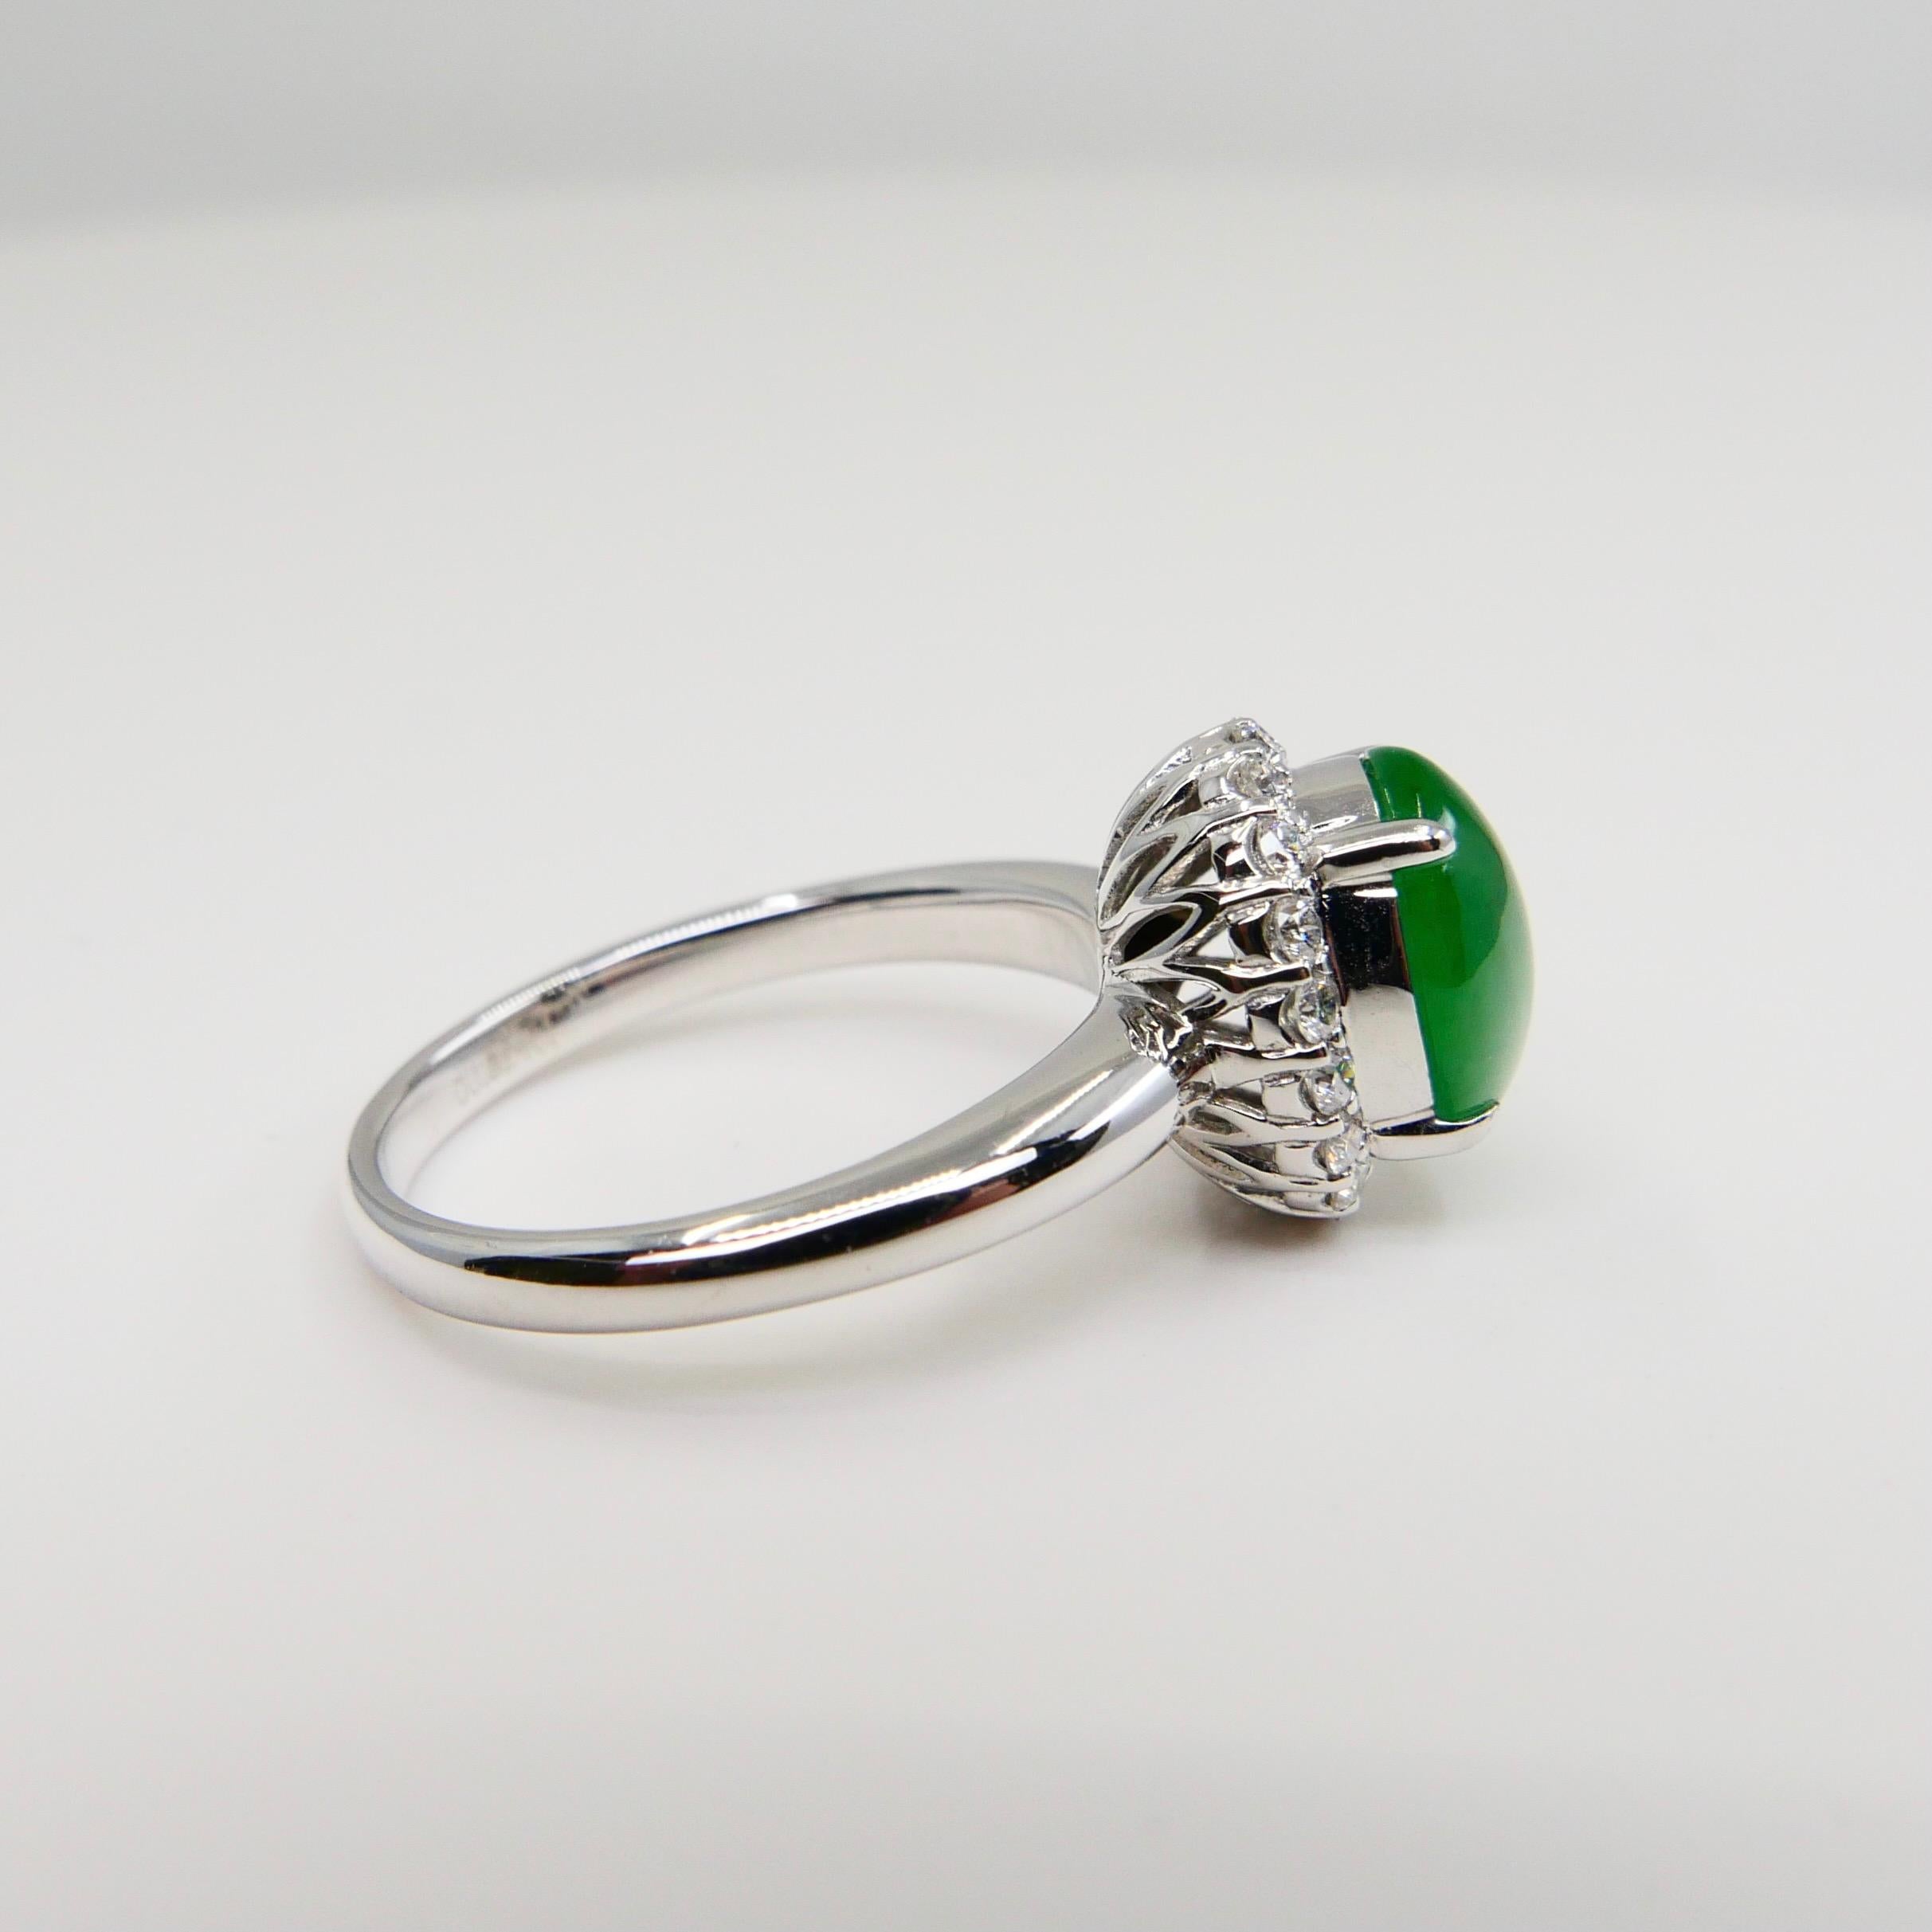 Certified Type A Jadeite Jade and Diamond Cocktail Ring, Close to Imperial Jade For Sale 4